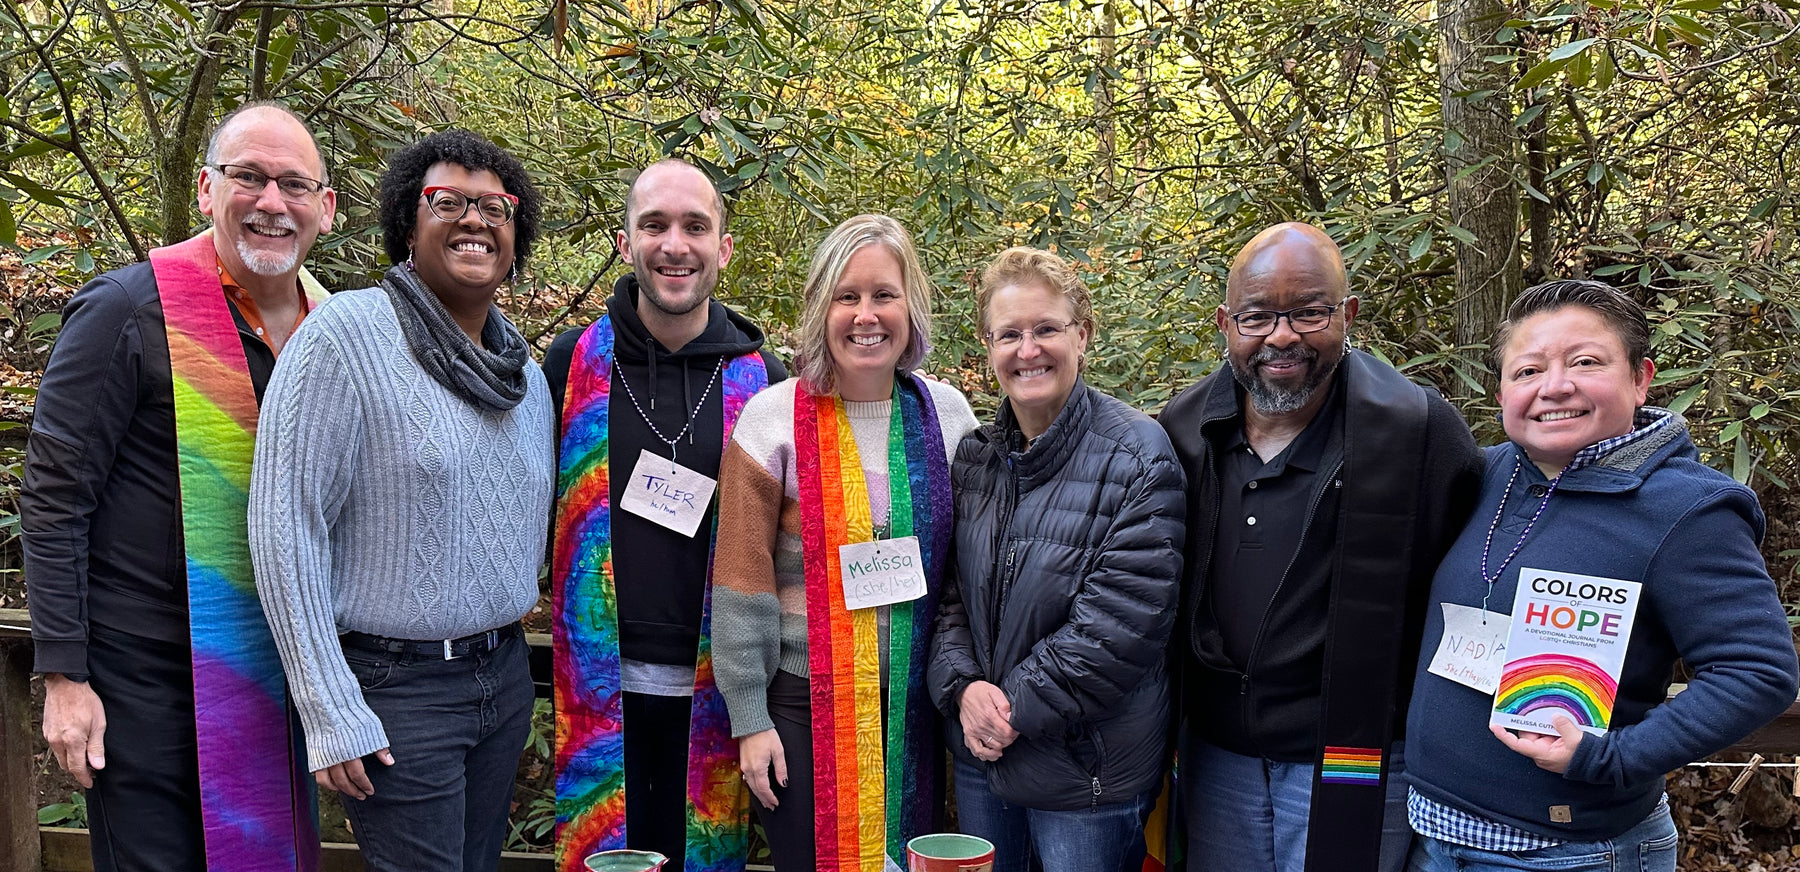 Hoping in Color: The Sacred Community of the Colors of Hope Retreat